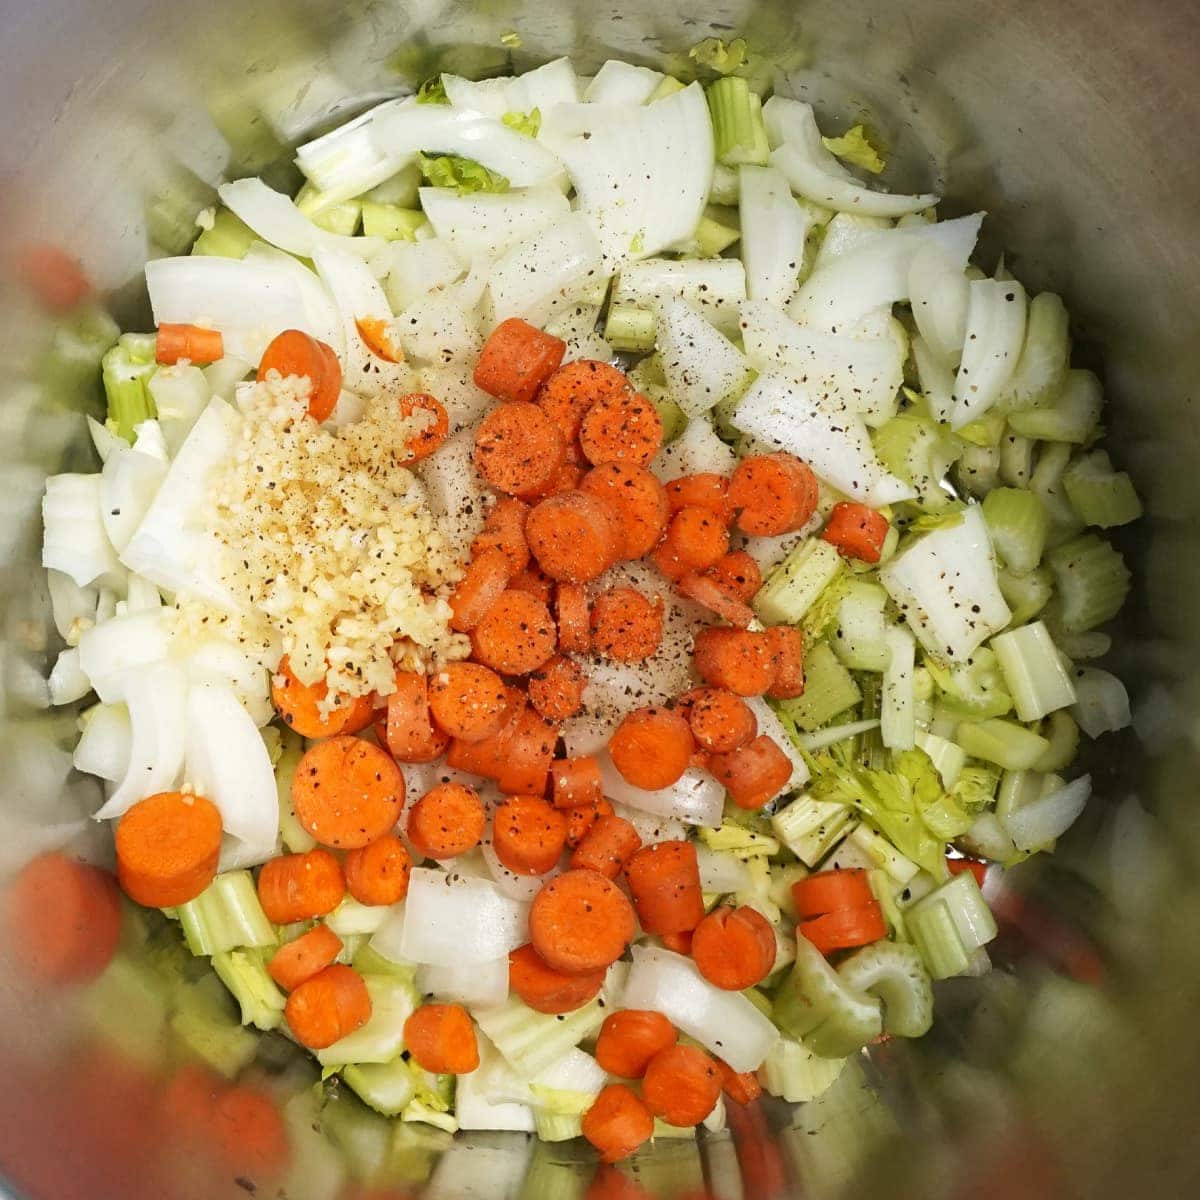 Ingredients to put in the soup: celery, carrots, onion, garlic